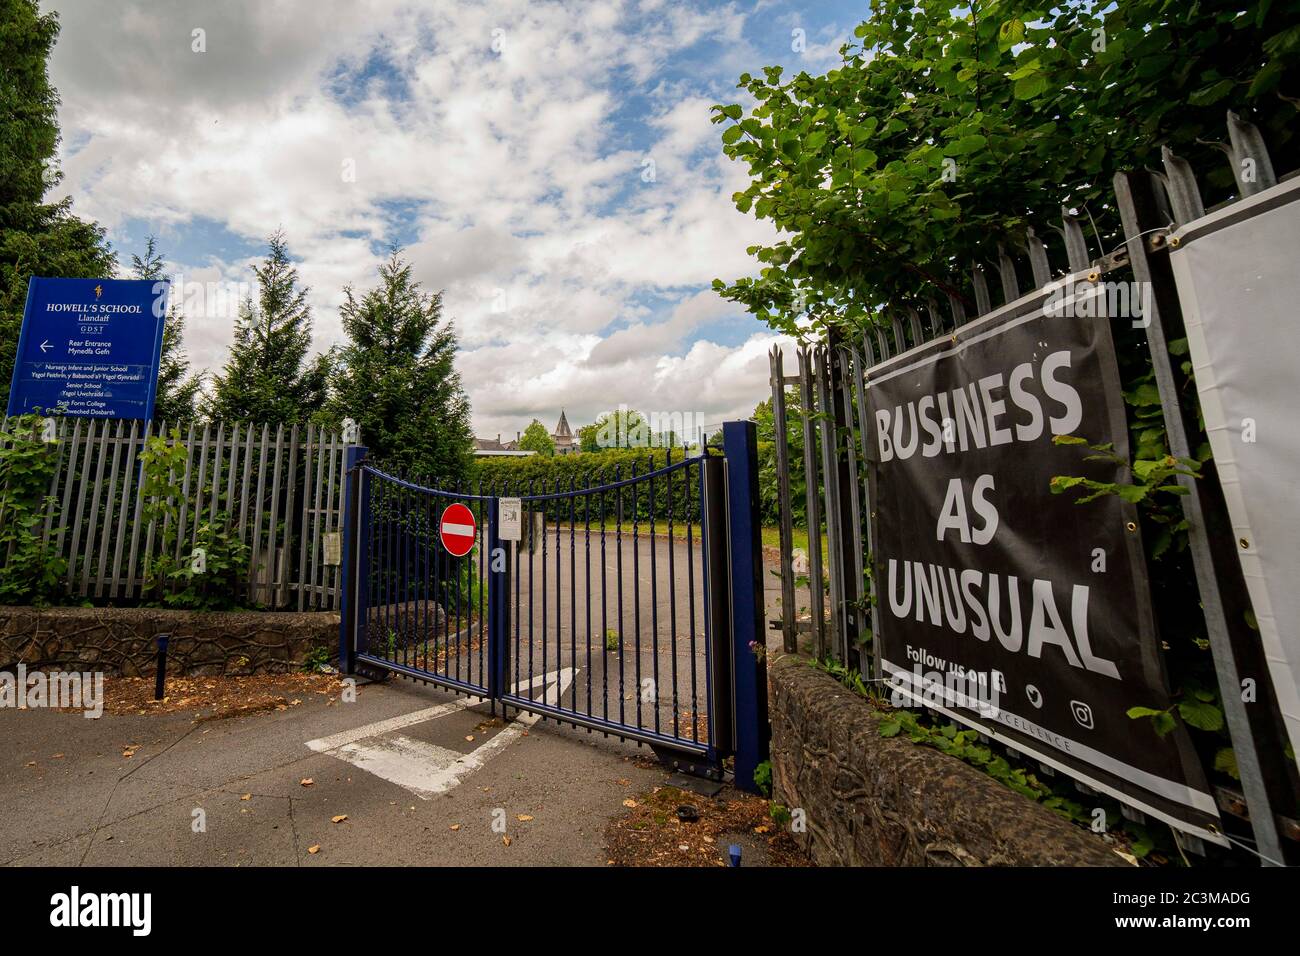 A school gate of Howell’s School in Cardiff with a sign saying ‘business as unusual’, June 2020. Stock Photo